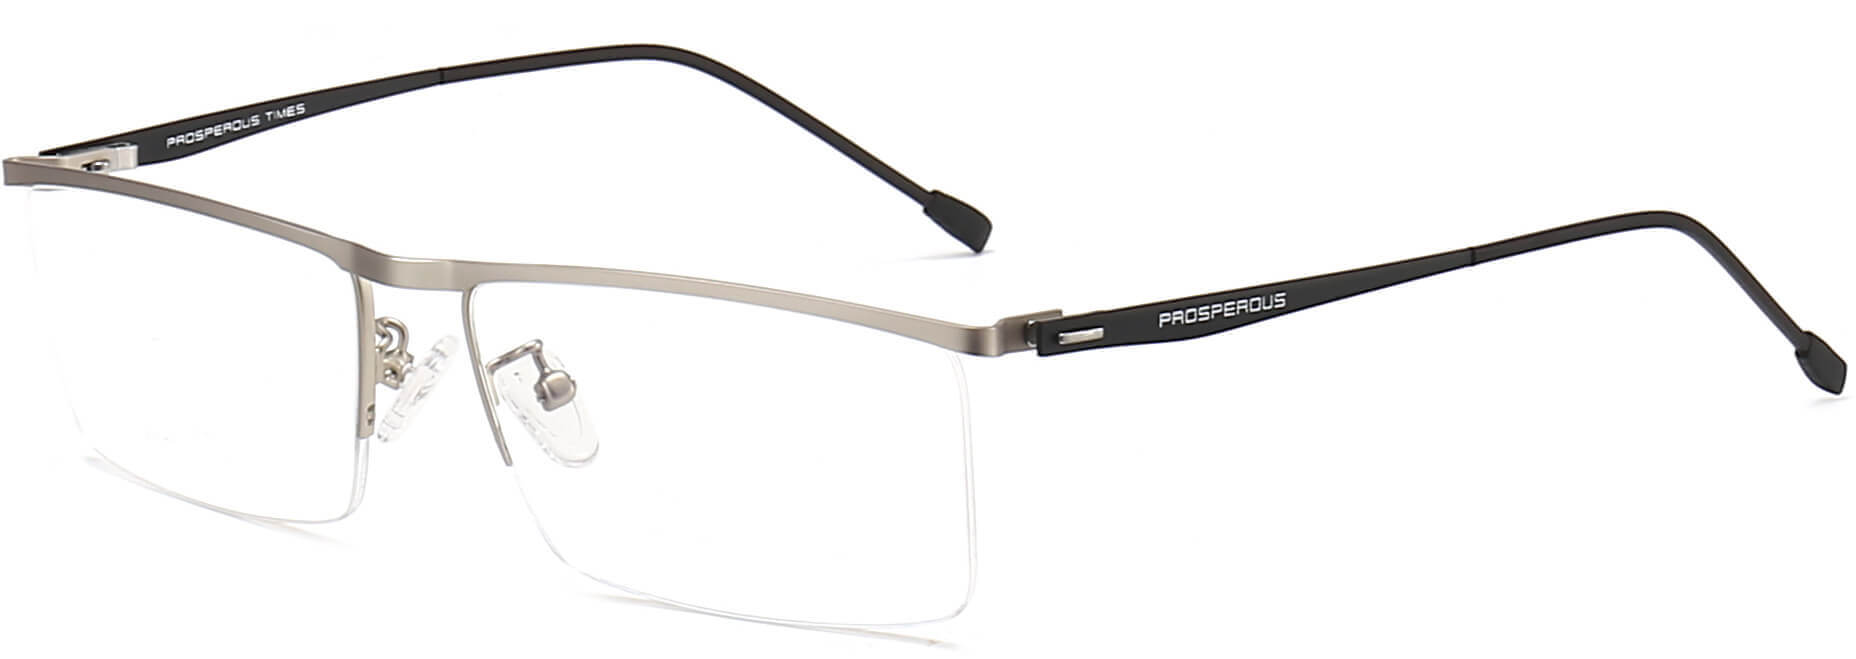 Harlan Rectangle Silver Eyeglasses from ANRRI, angle view